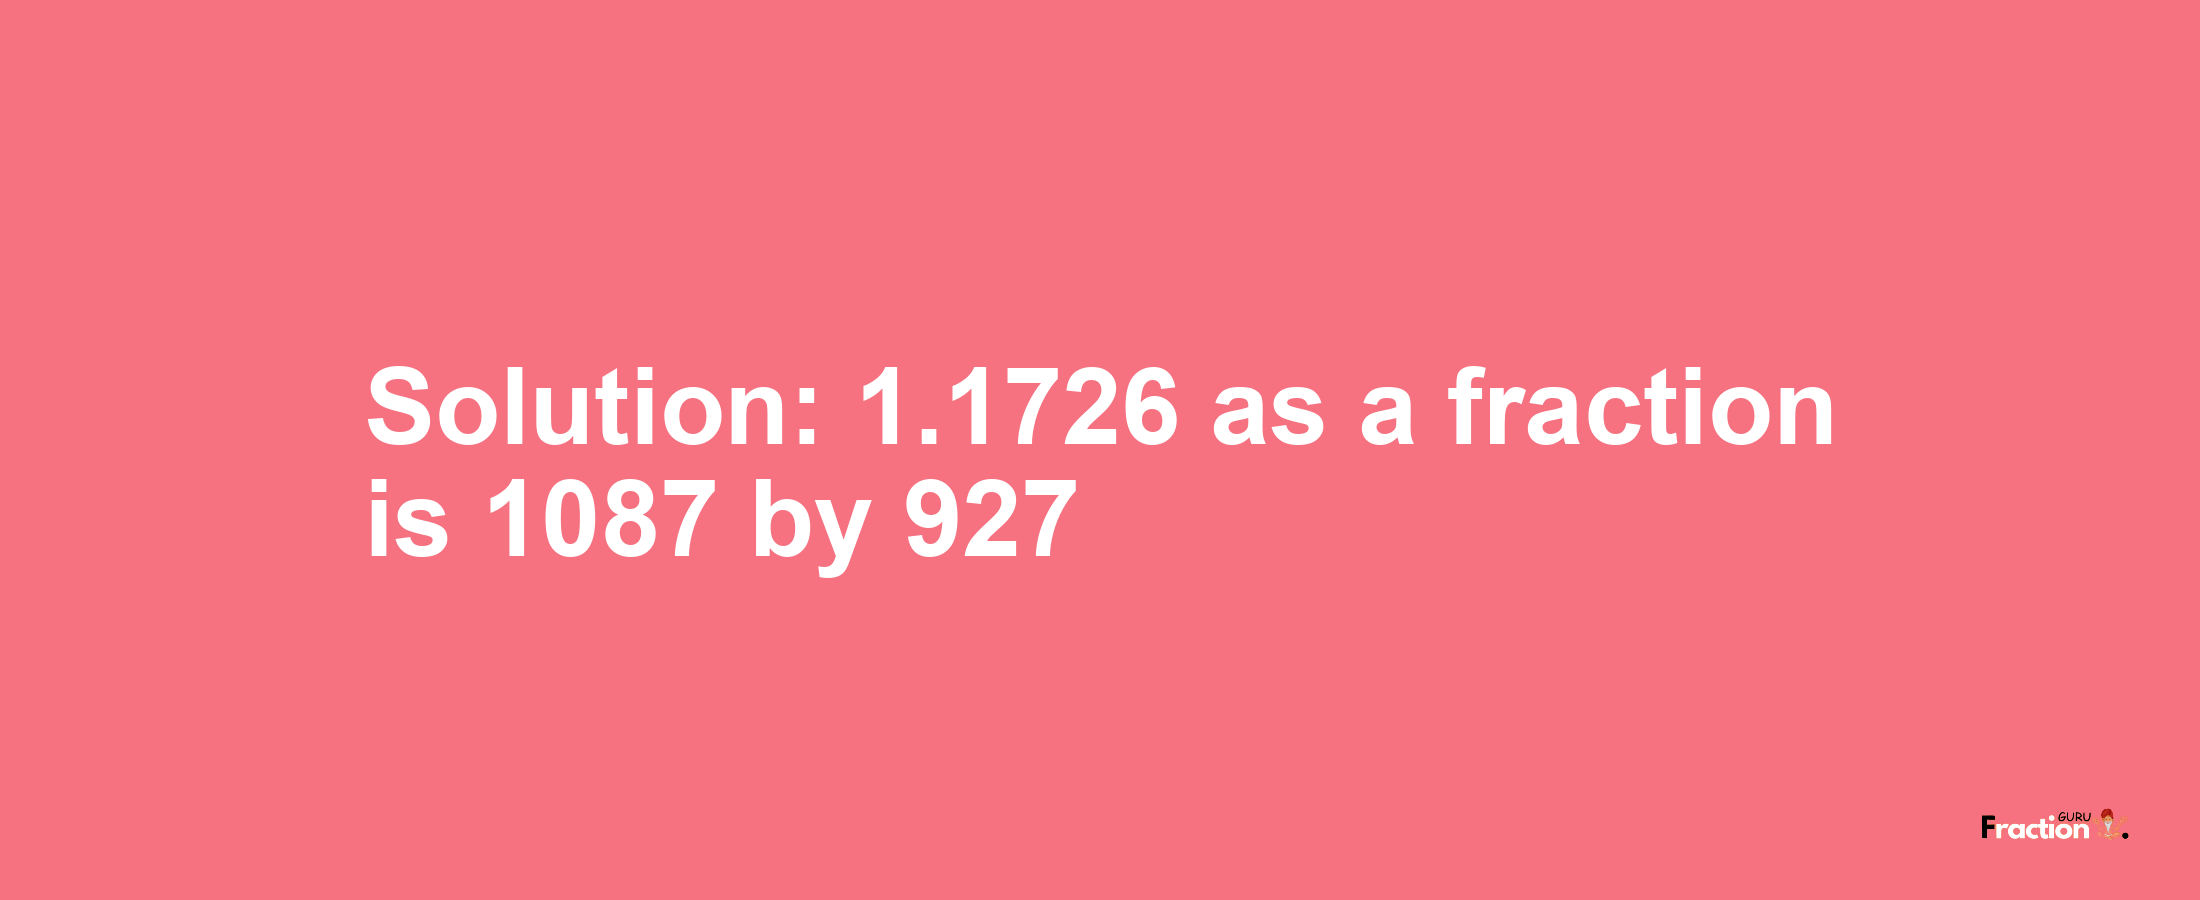 Solution:1.1726 as a fraction is 1087/927